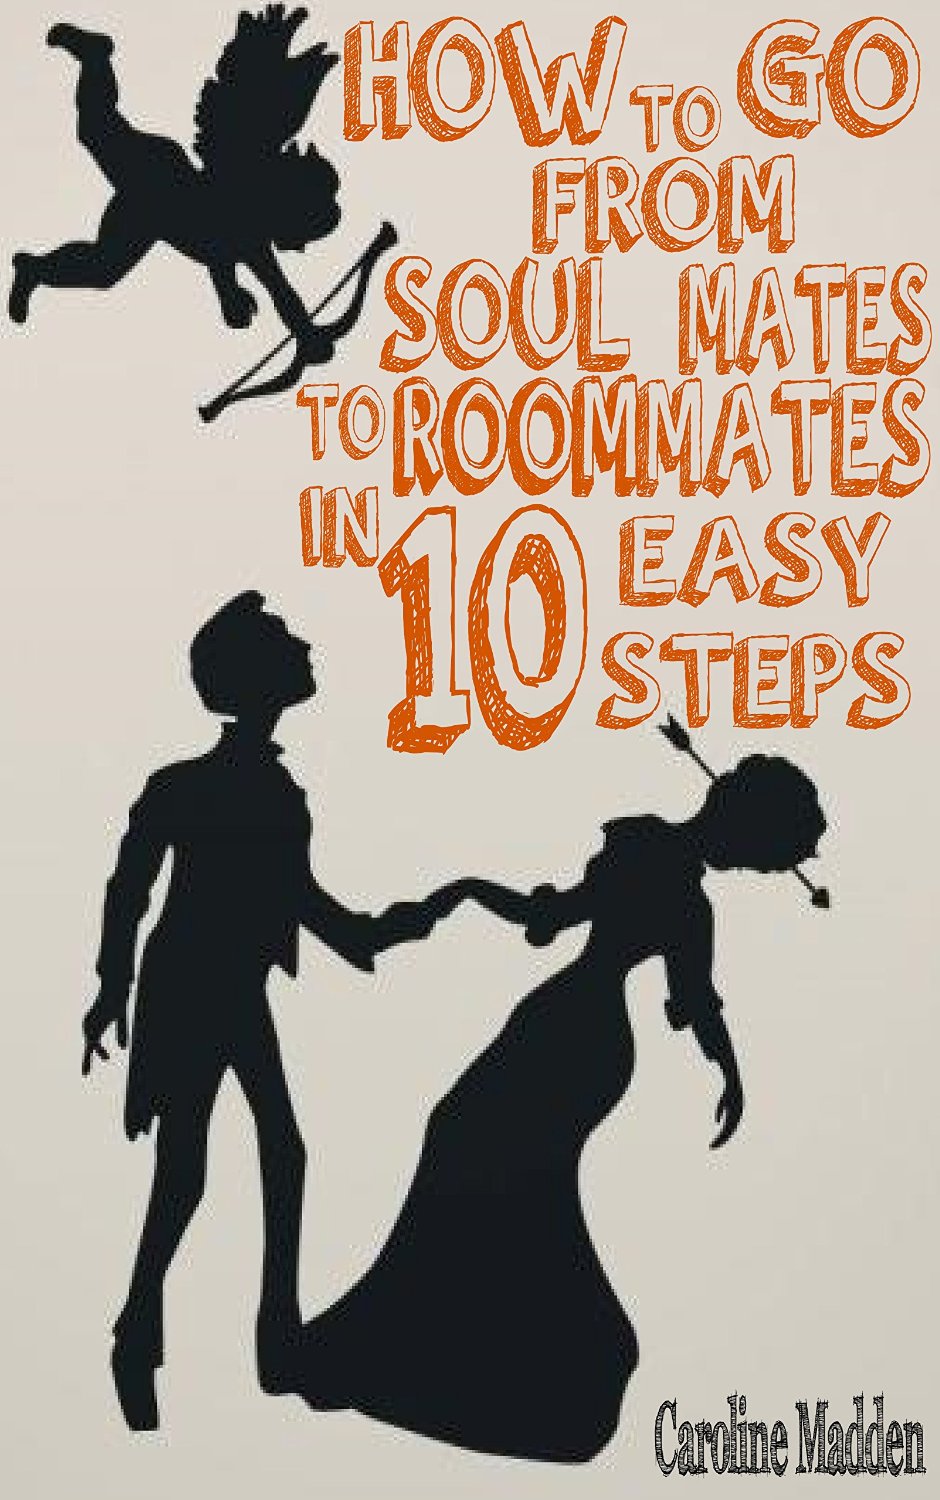 how to go from soul mate to room mate, 10 easy steps by caroline madden